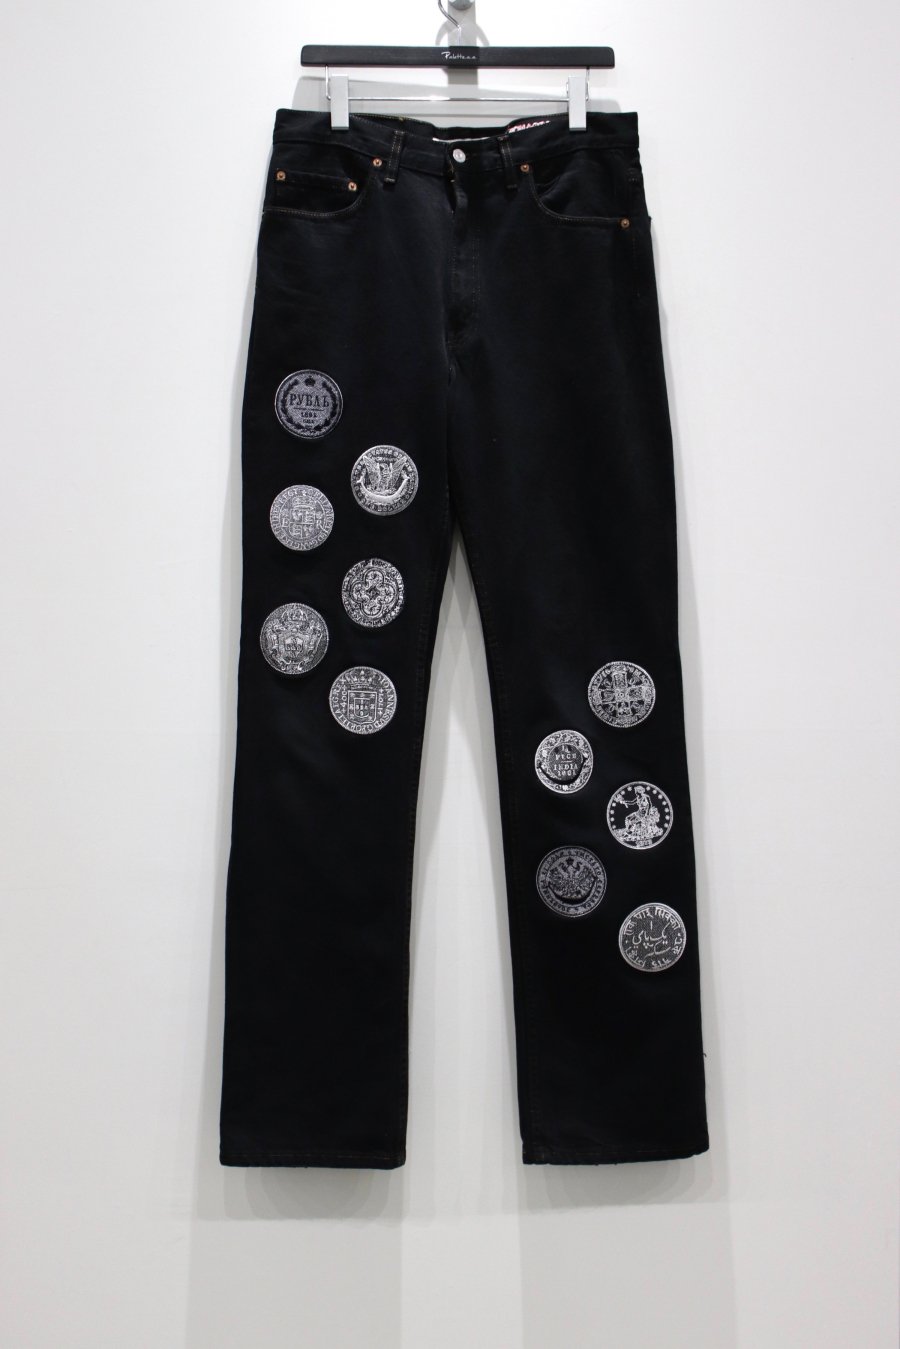 Children of the discordance  TYPE-512 EMBROIDERY DENIM PANTS A<img class='new_mark_img2' src='https://img.shop-pro.jp/img/new/icons15.gif' style='border:none;display:inline;margin:0px;padding:0px;width:auto;' />